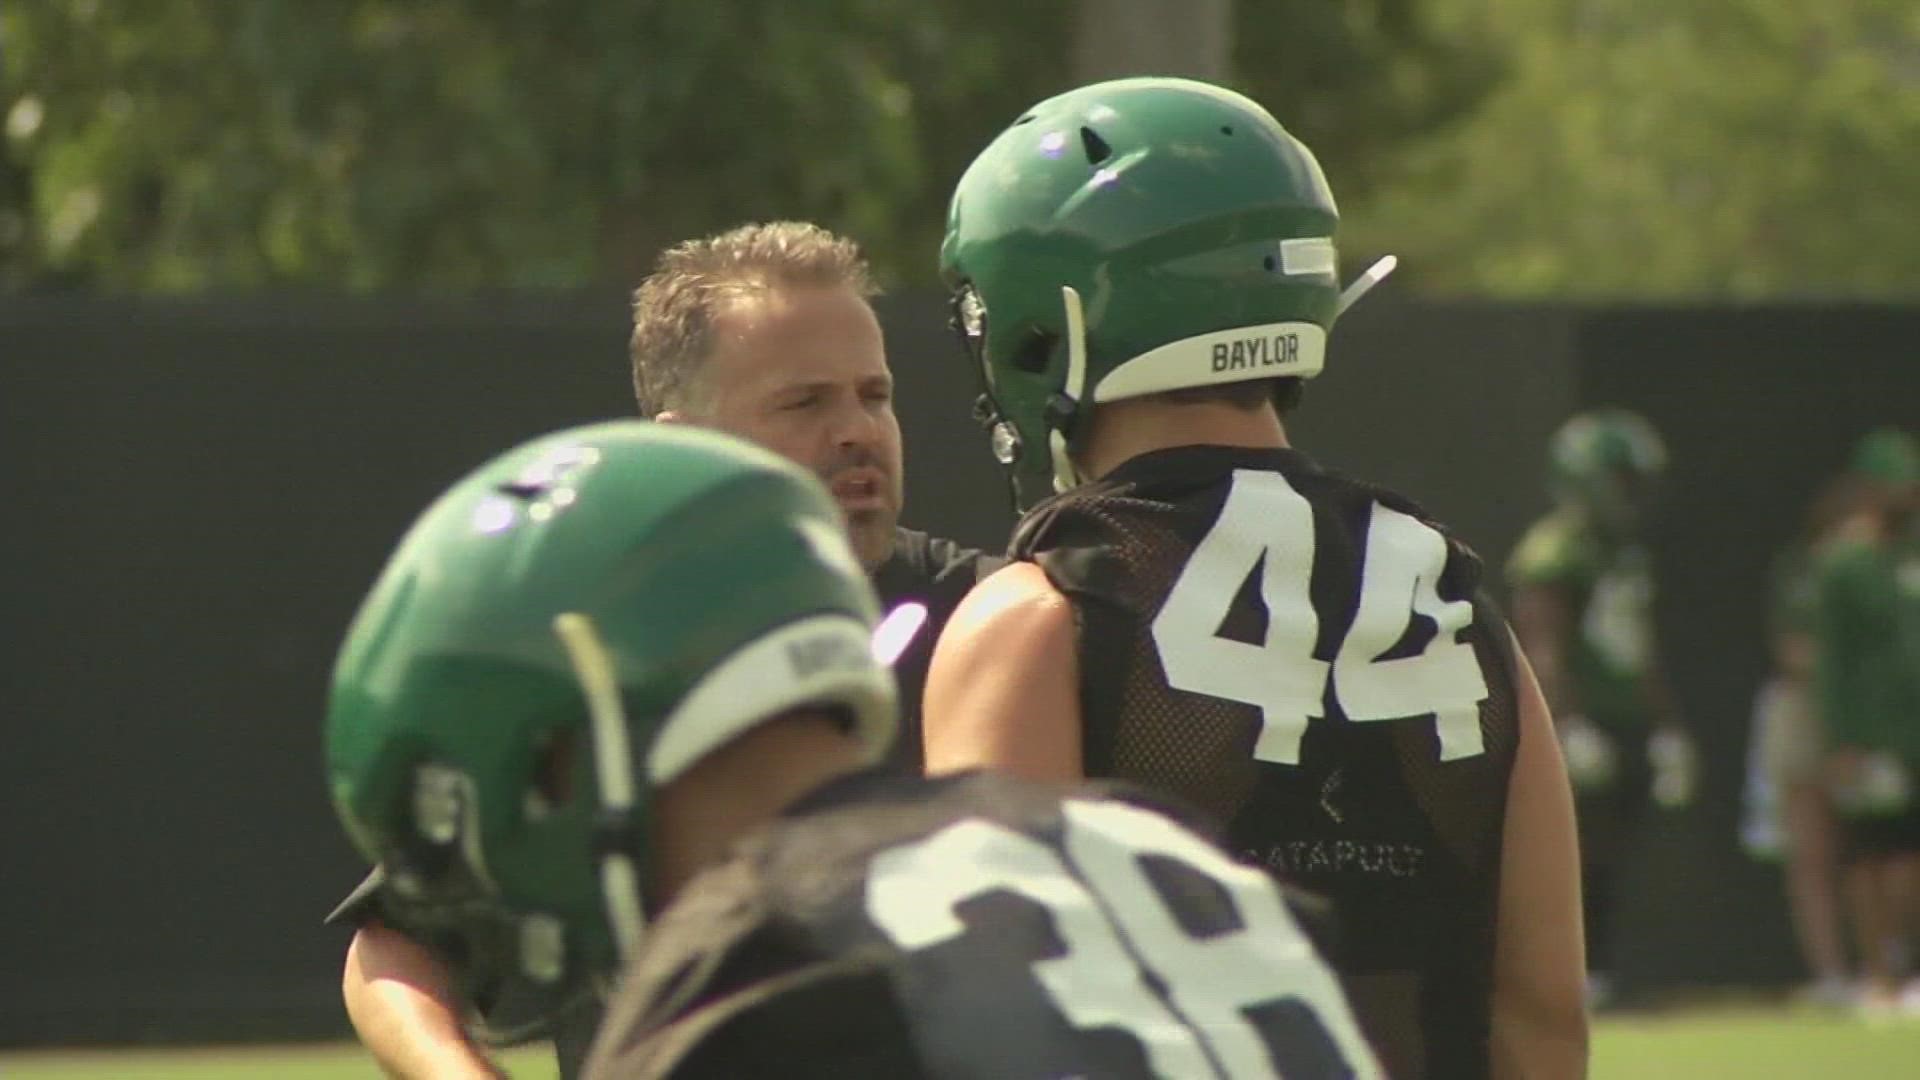 Former Baylor Coach Rhule becomes the 31st Cornhuskers coach